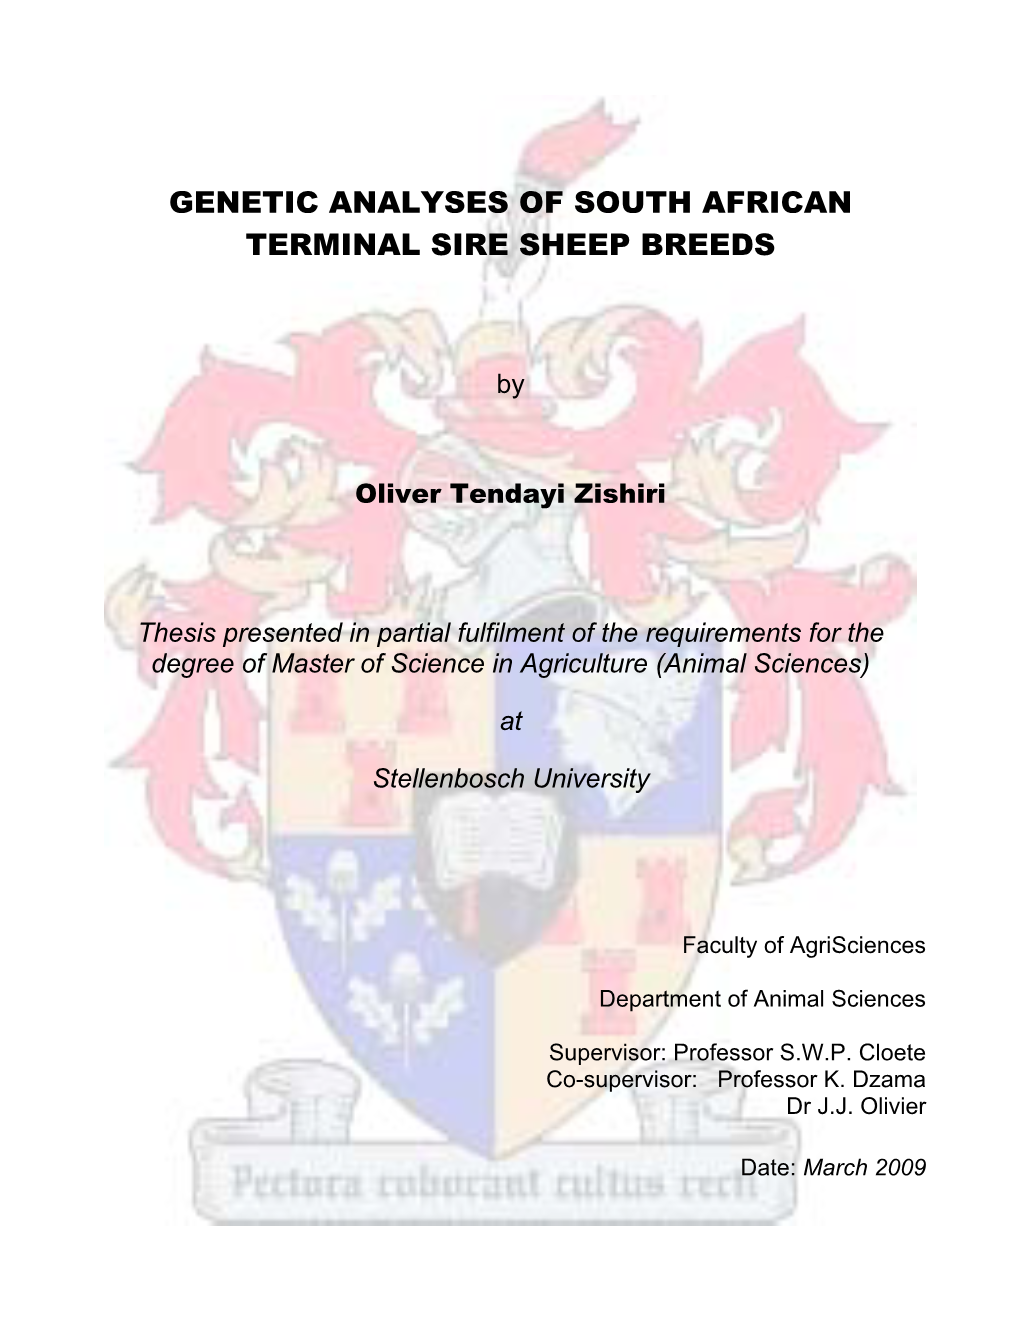 Genetic Analyses of South African Terminal Sire Sheep Breeds